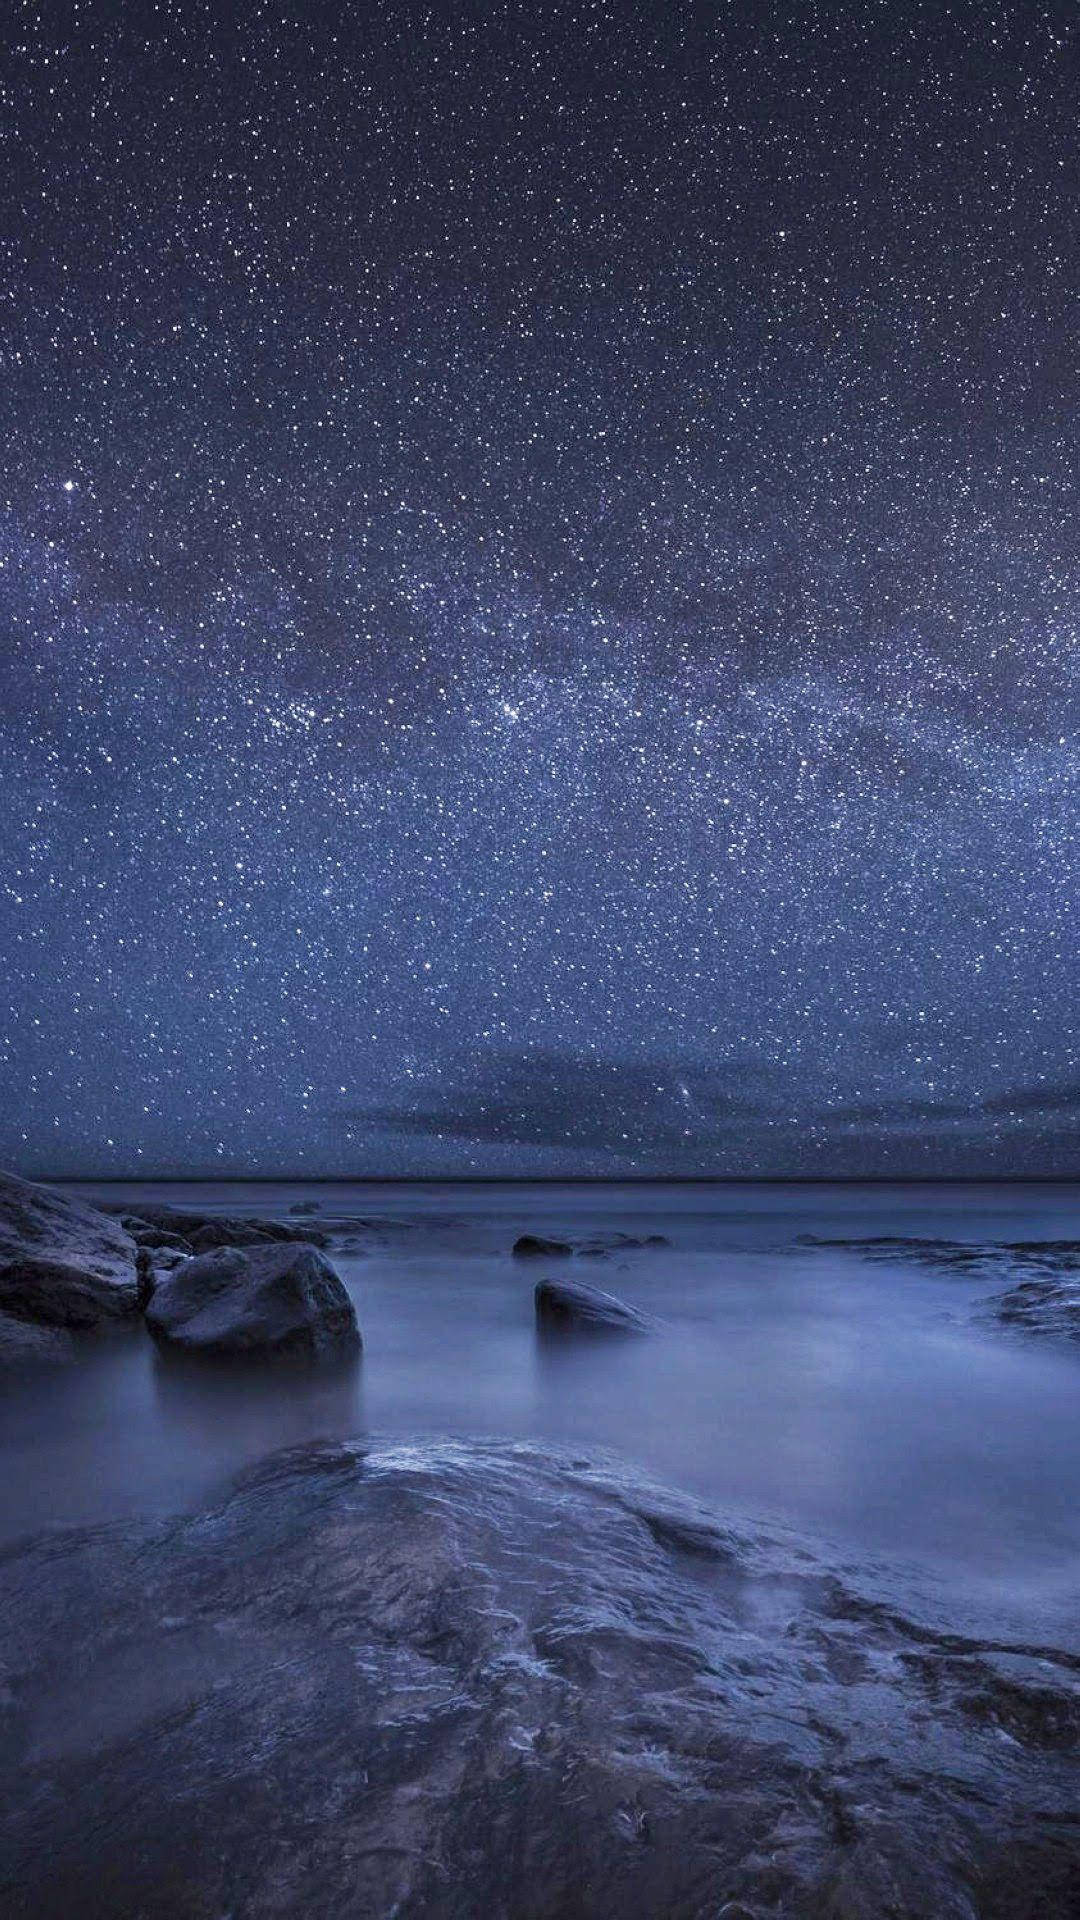 Download Starry Night Iphone 6s Live Wallpaper 